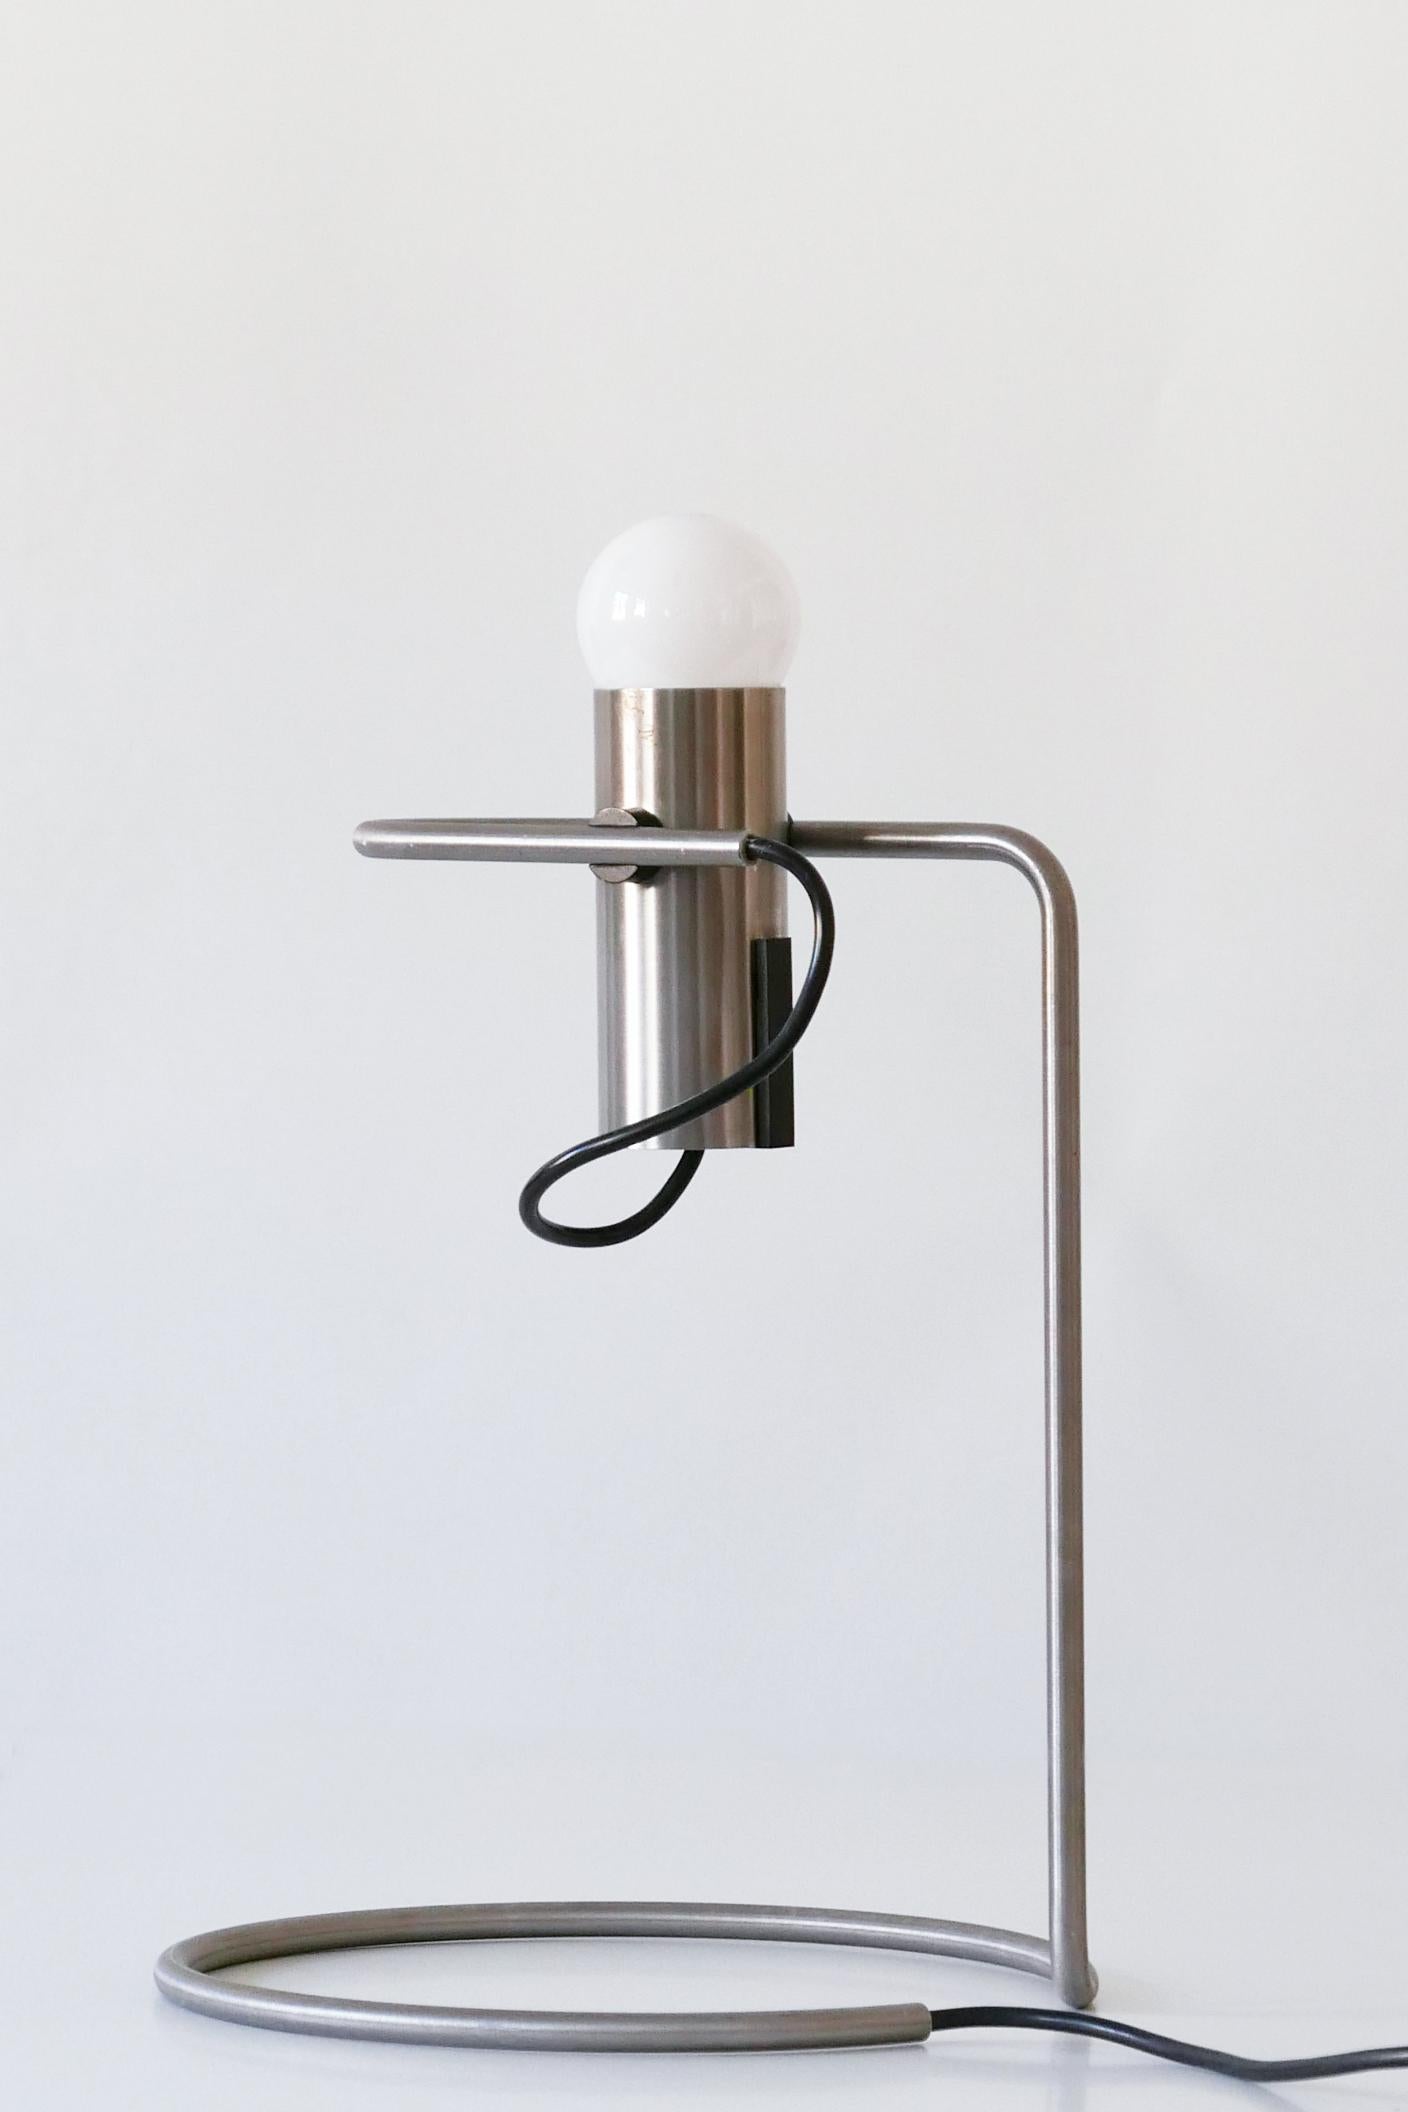 Exceptional Minimalistic Mid-Century Modern Table Lamp or Desk Light, 1960s For Sale 1